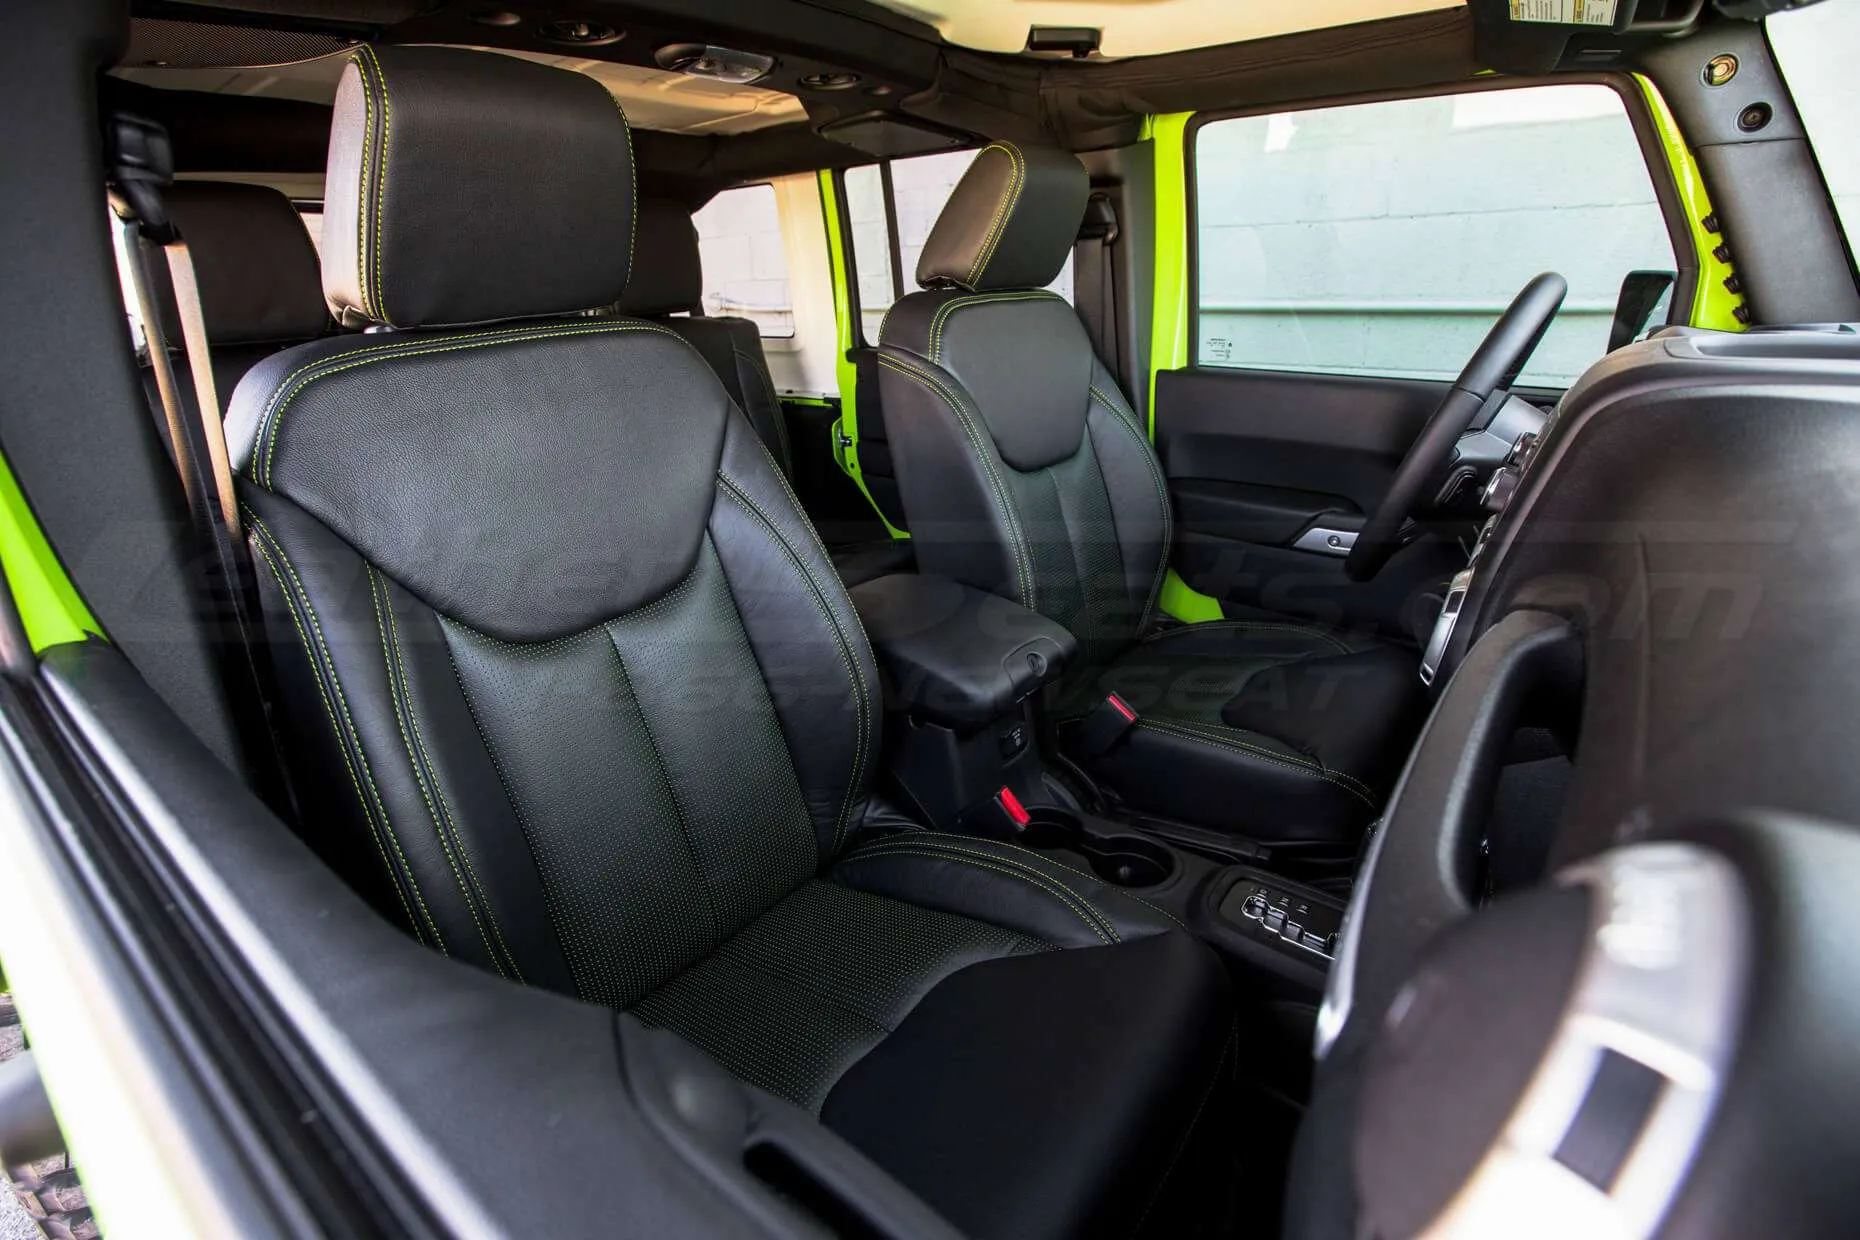 Jeep Wrangler Installed Leather Seats - Black & Piazza Green - Front interiors from passenger side